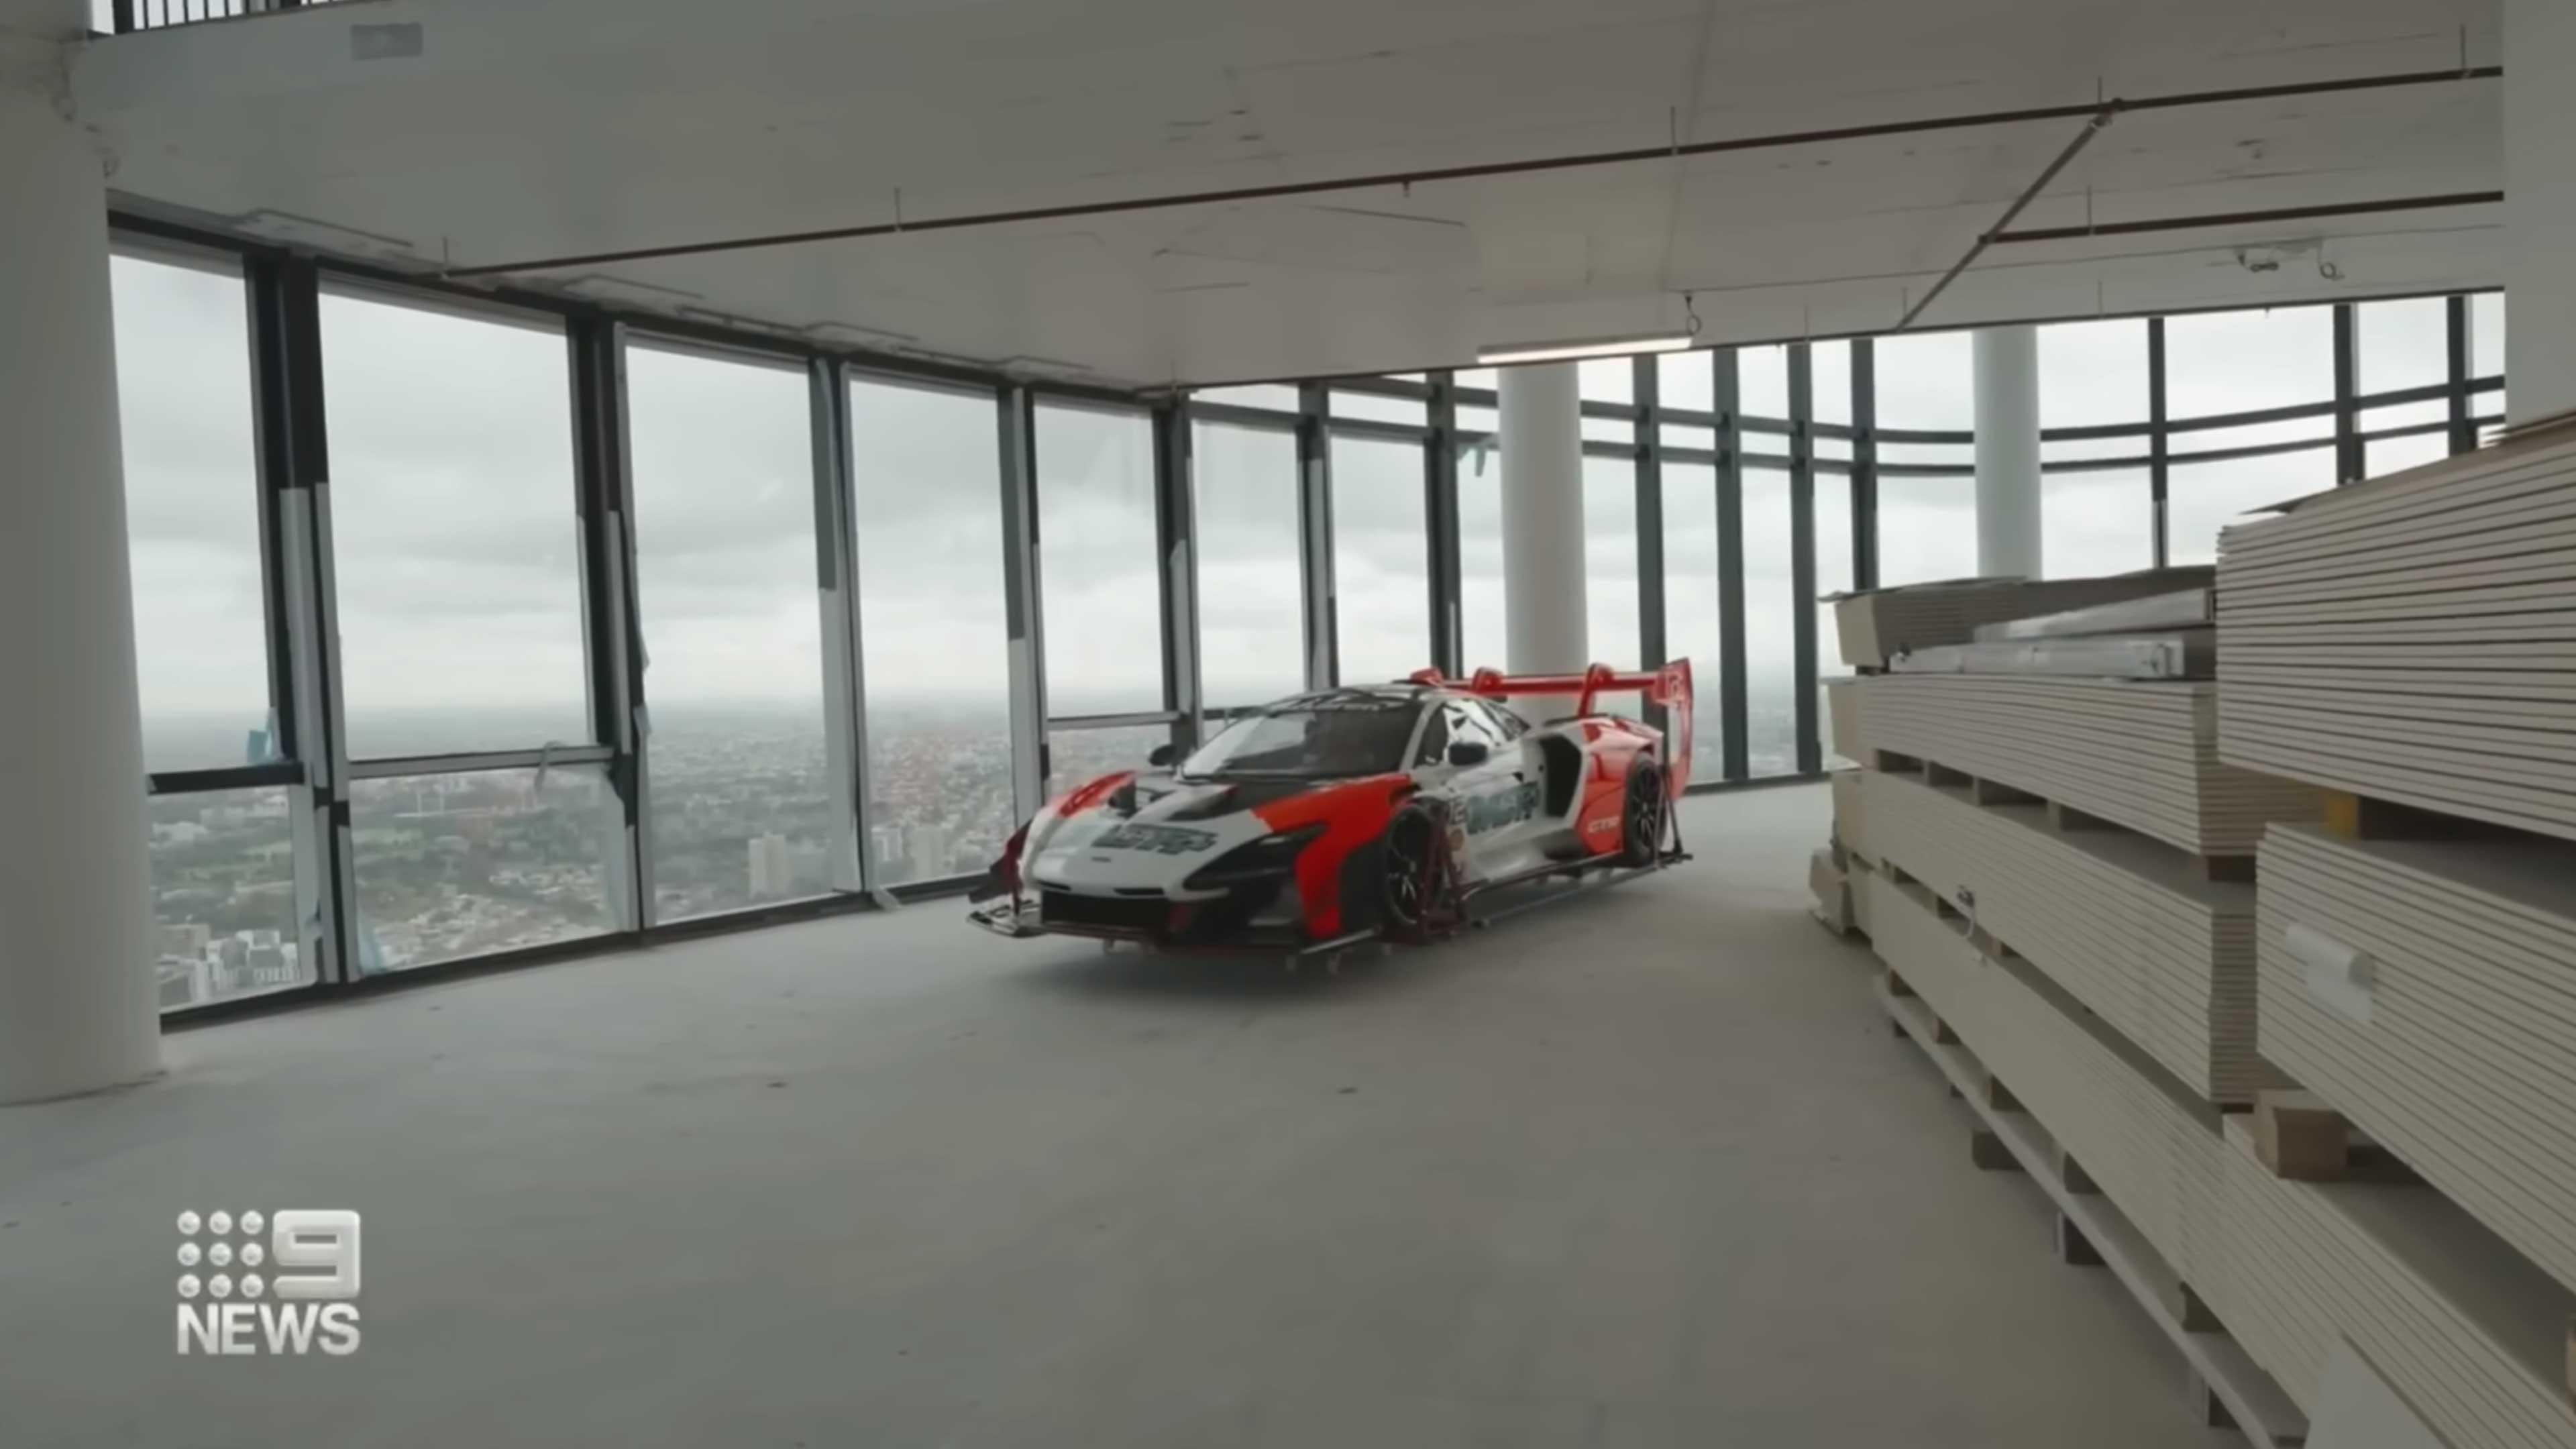 McLaren Senna GTR Marlboro Livery in penthouse at an altitude of 200 meters